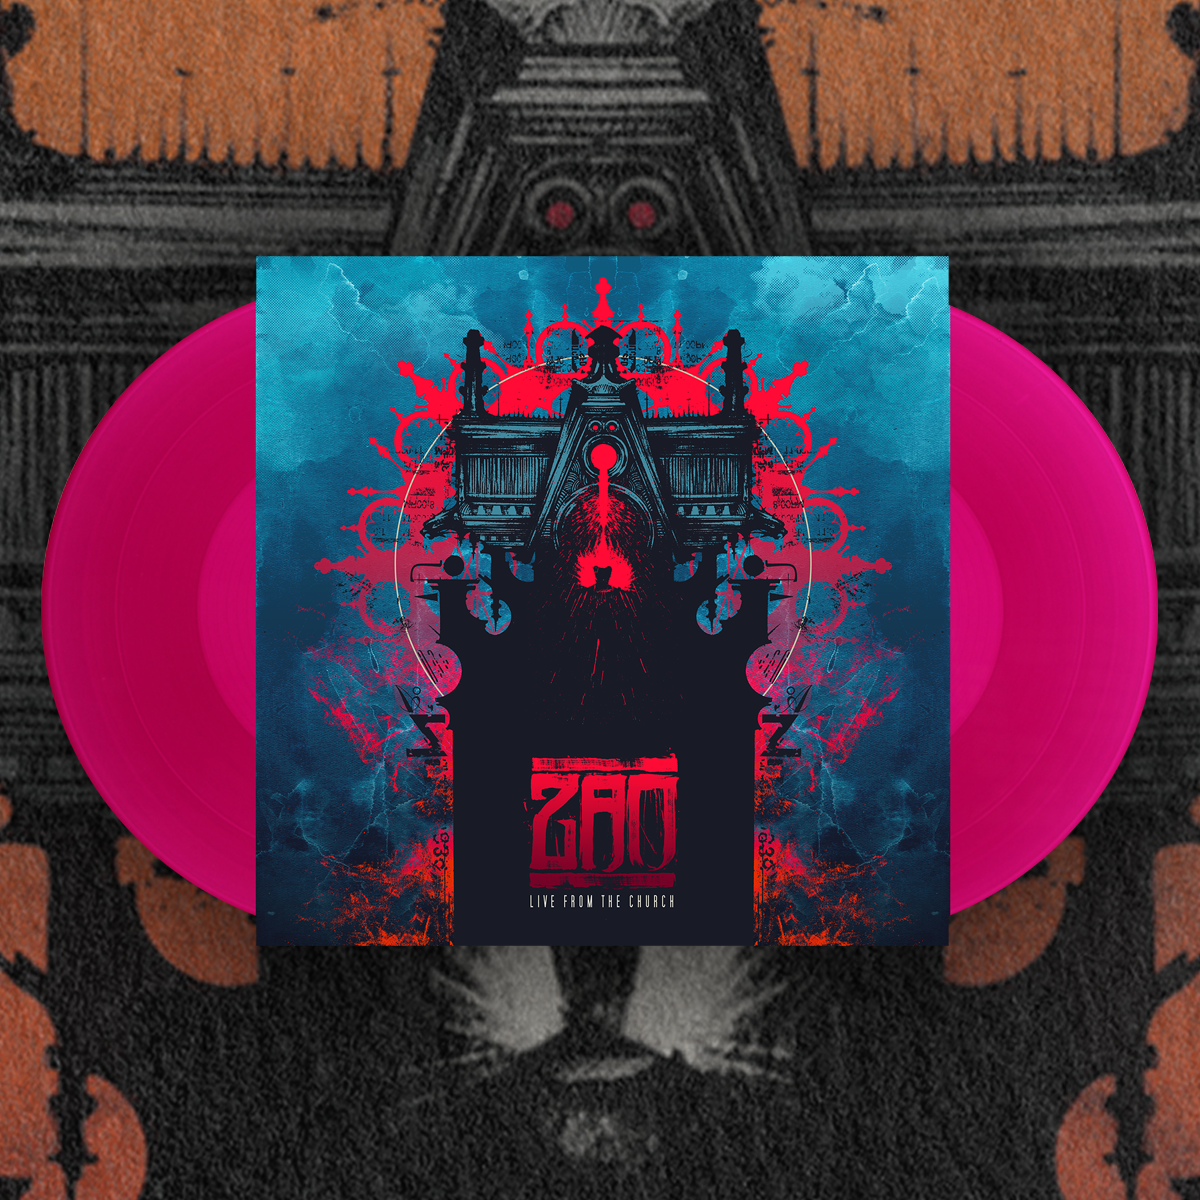 ZAO "LIVE FROM THE CHURCH" Limited Edition 2LP Opaque Magenta Vinyl (PRE-ORDER)